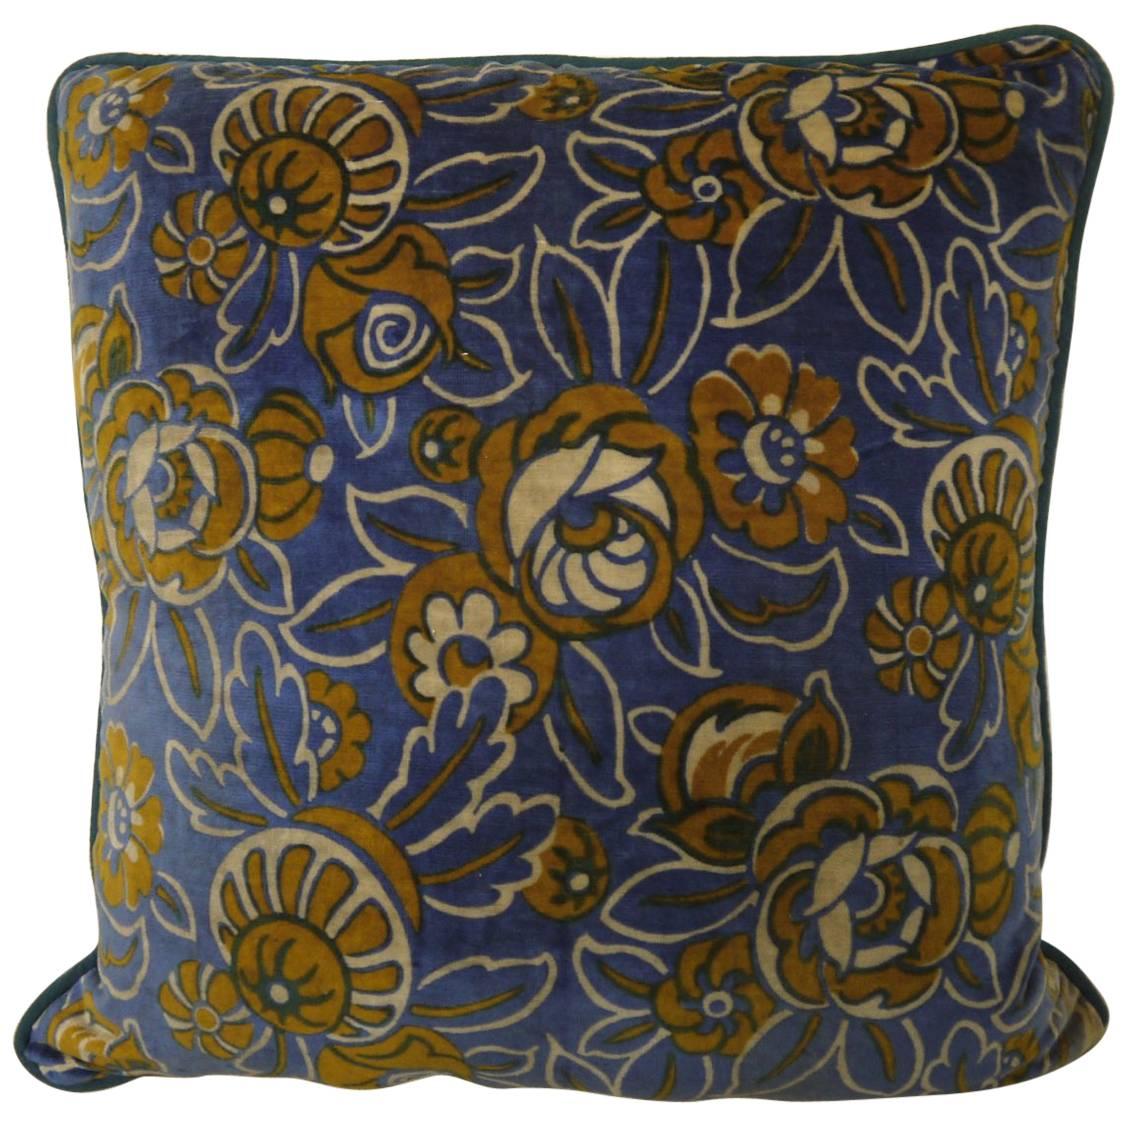 French 1920s Art Deco Tan and Blue Floral Velvet Cushion For Sale